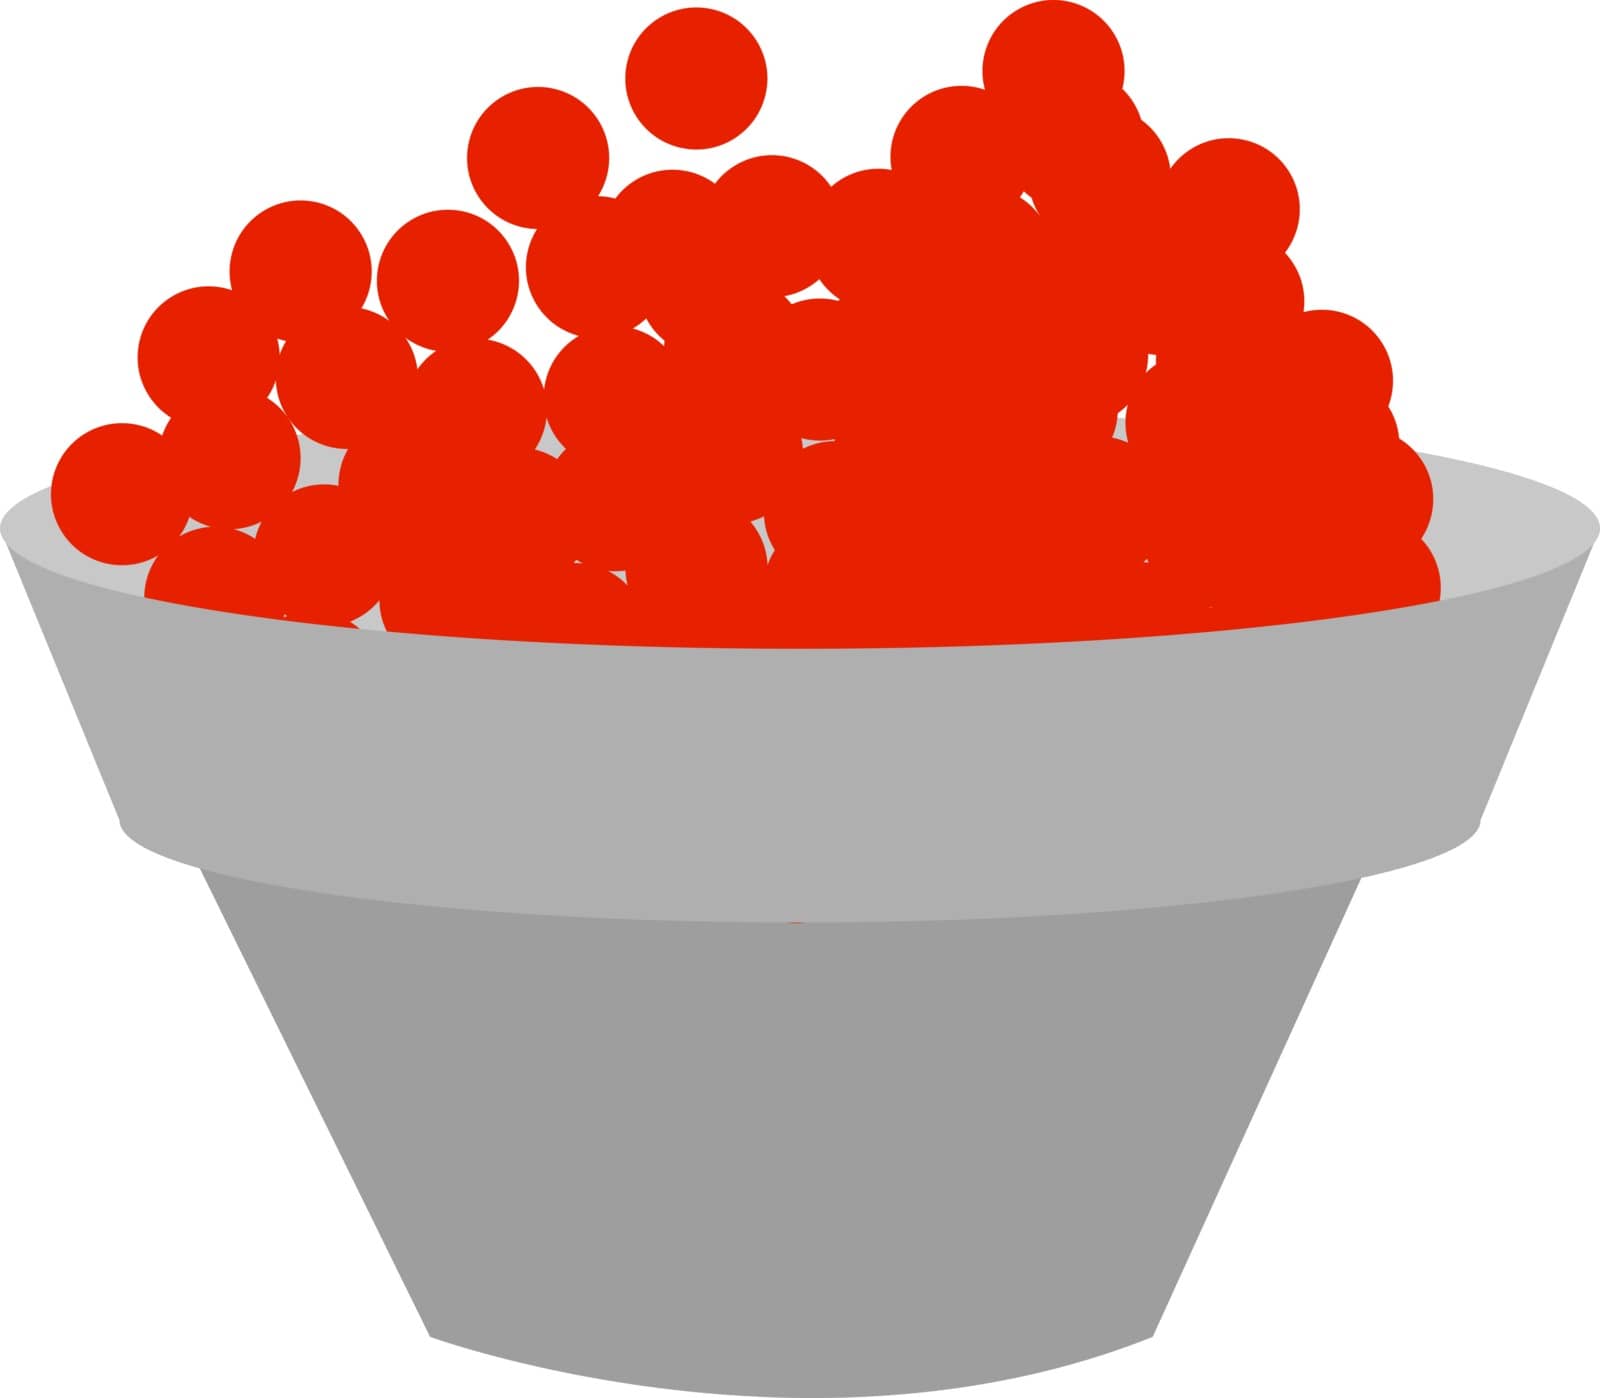 Red caviar, illustration, vector on white background.